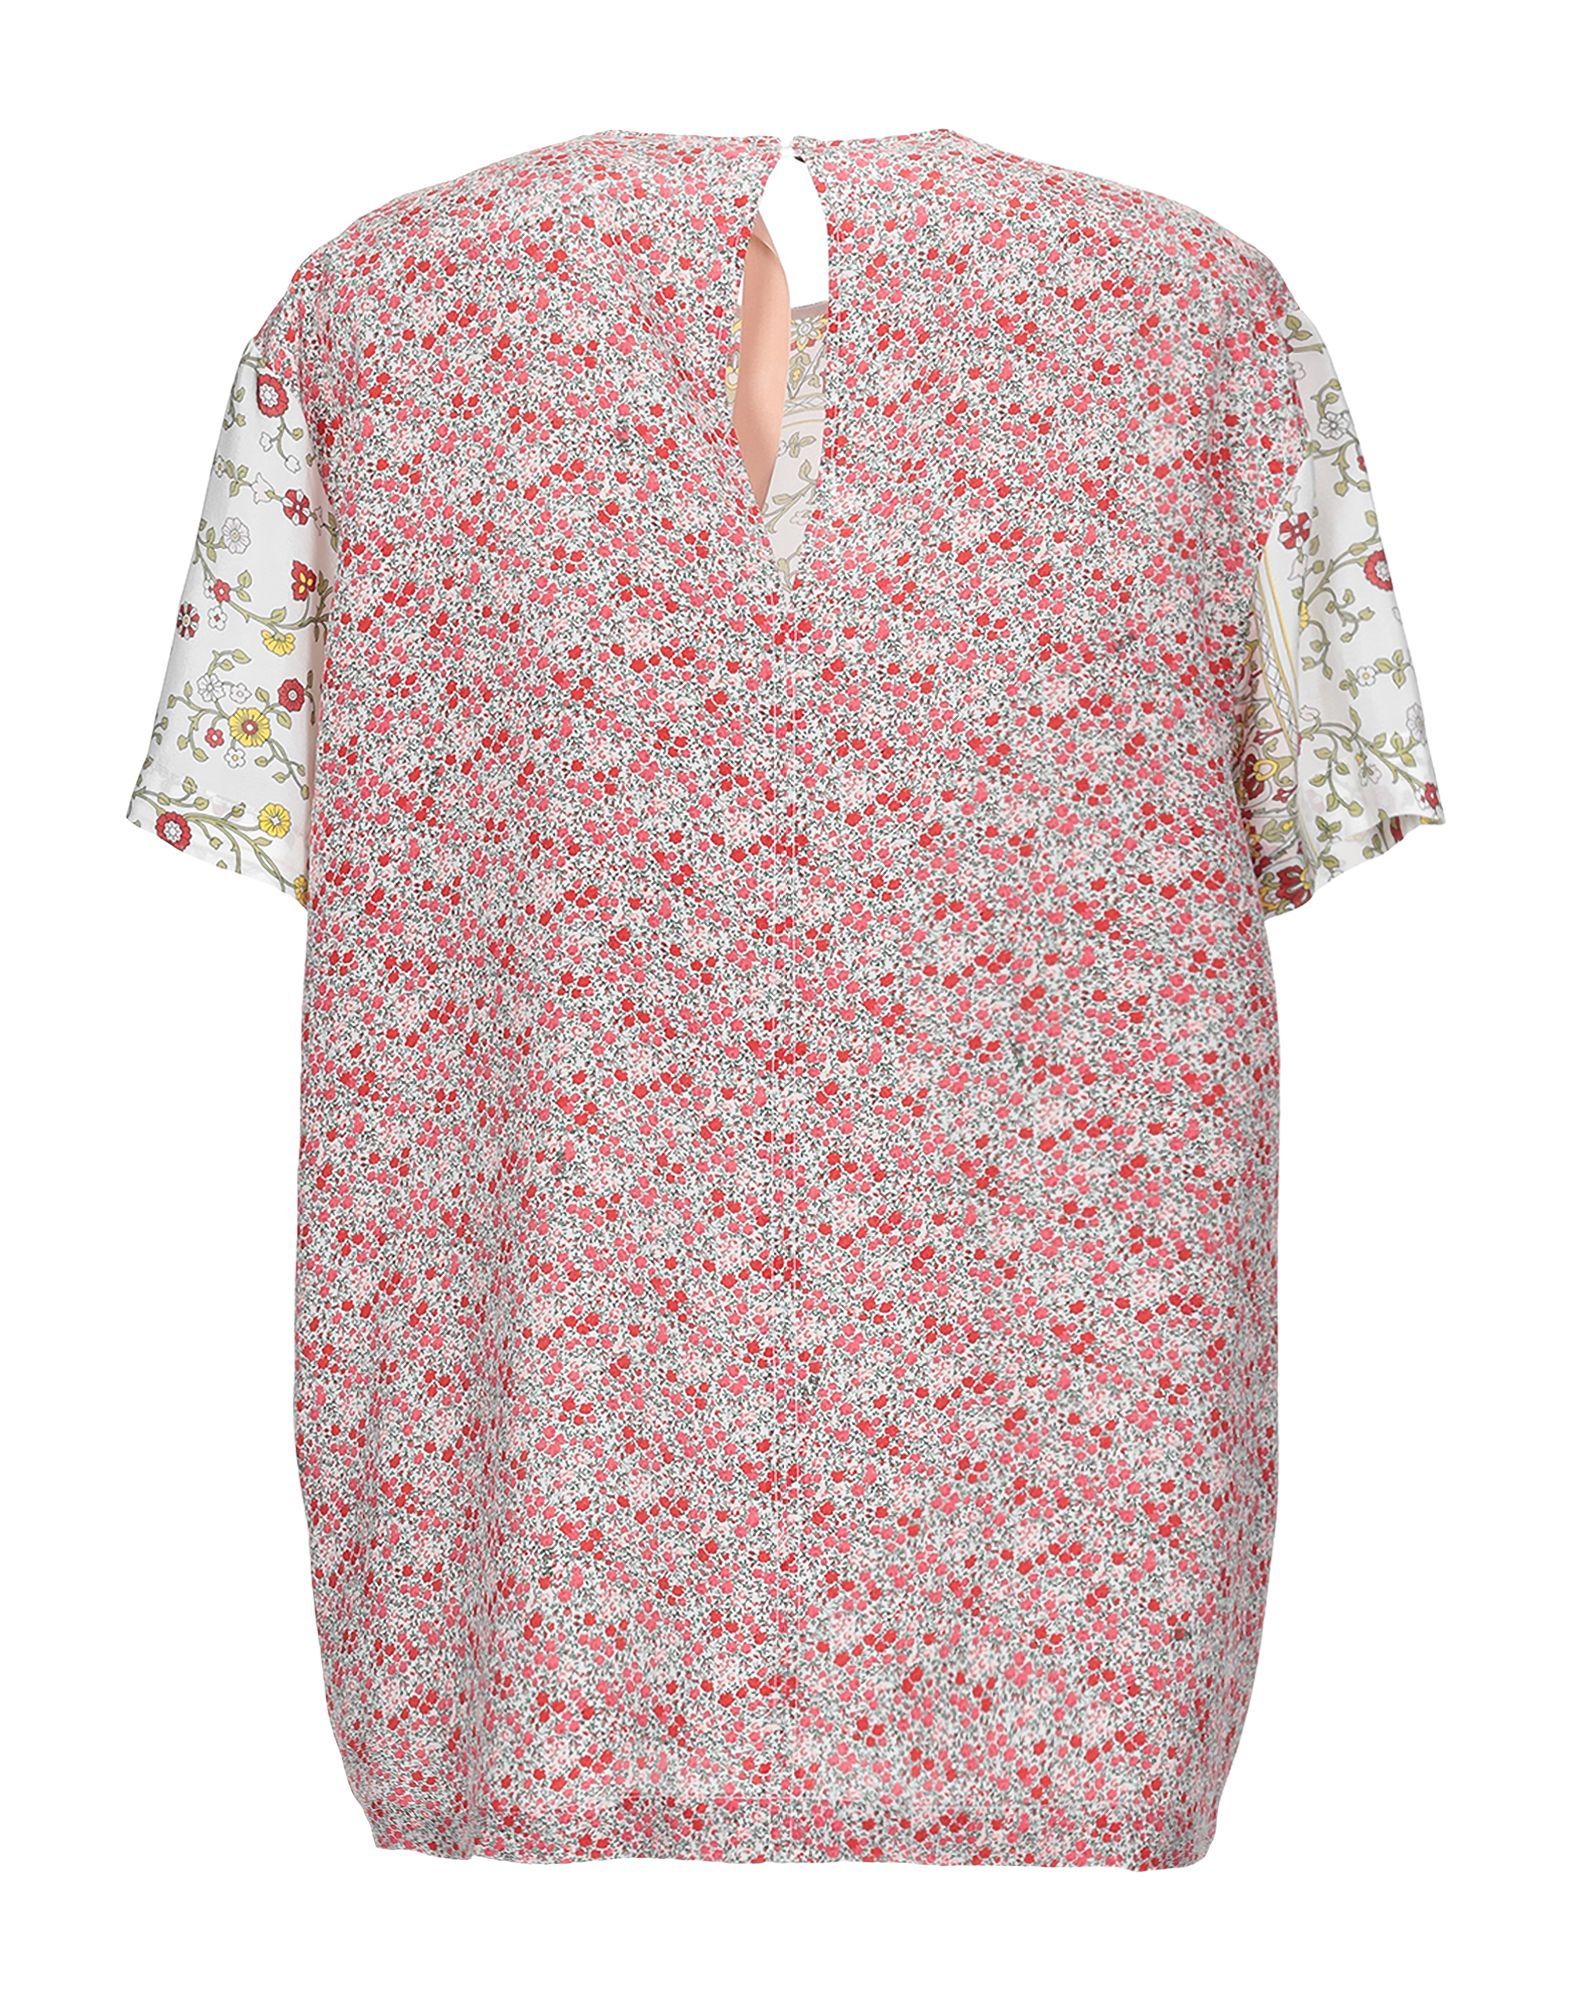 crepe, embroidered detailing, floral design, front closure, button closing, short sleeves, round collar, no pockets, large sized